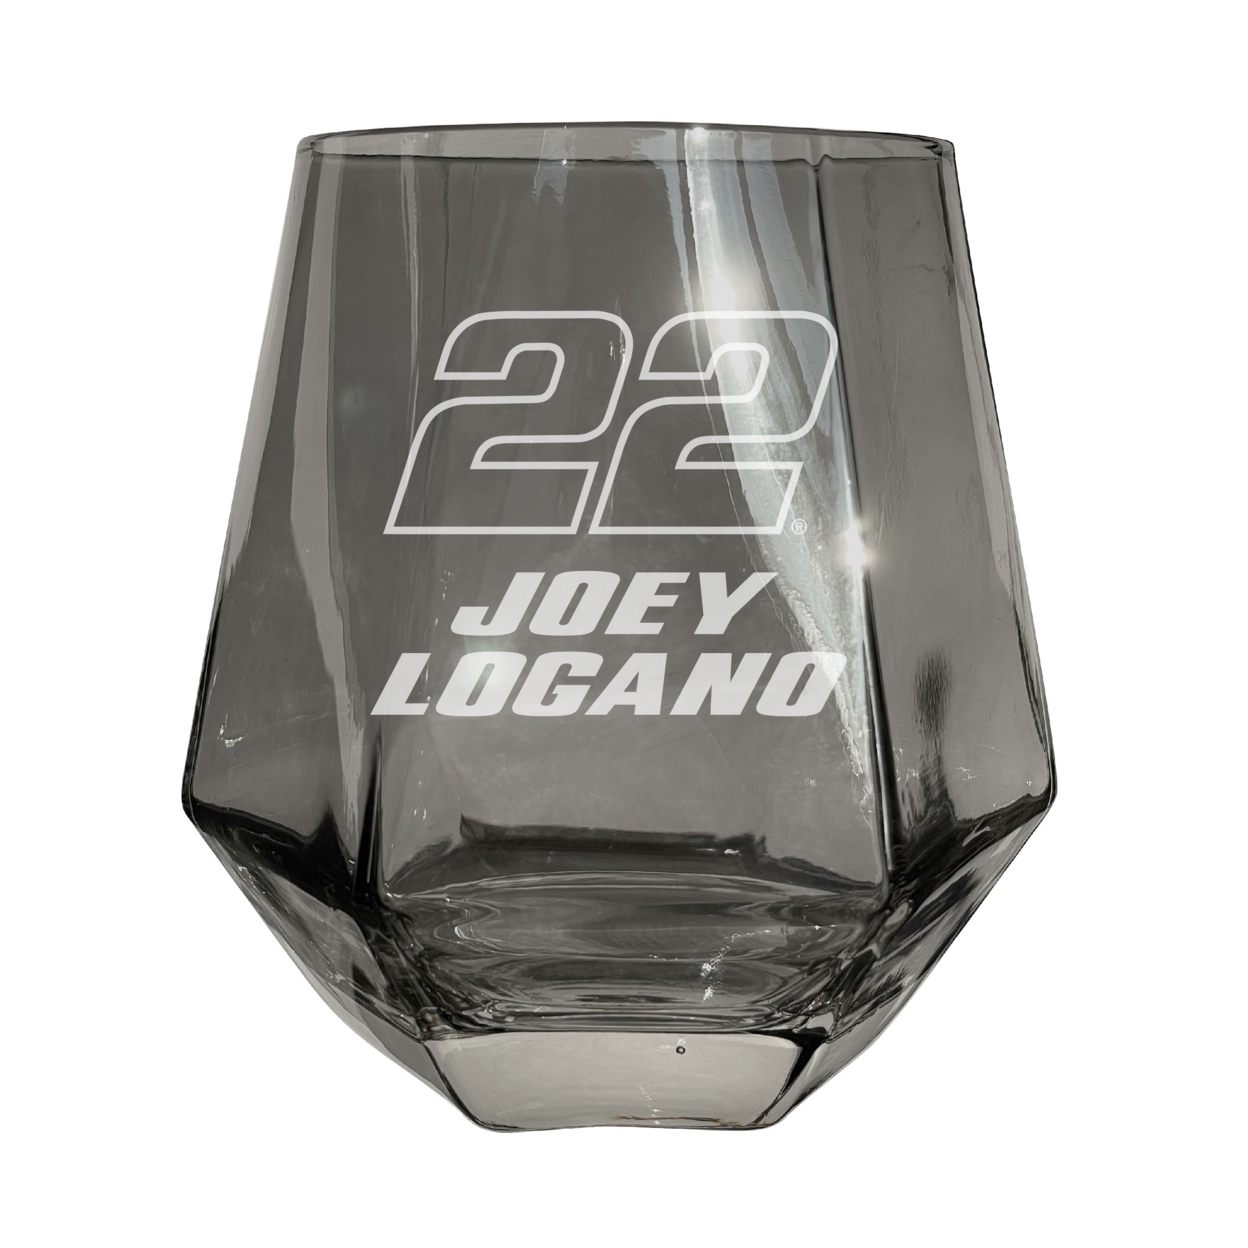 #22 Joey Logano Officially Licensed 10 Oz Engraved Diamond Wine Glass - Clear, Single